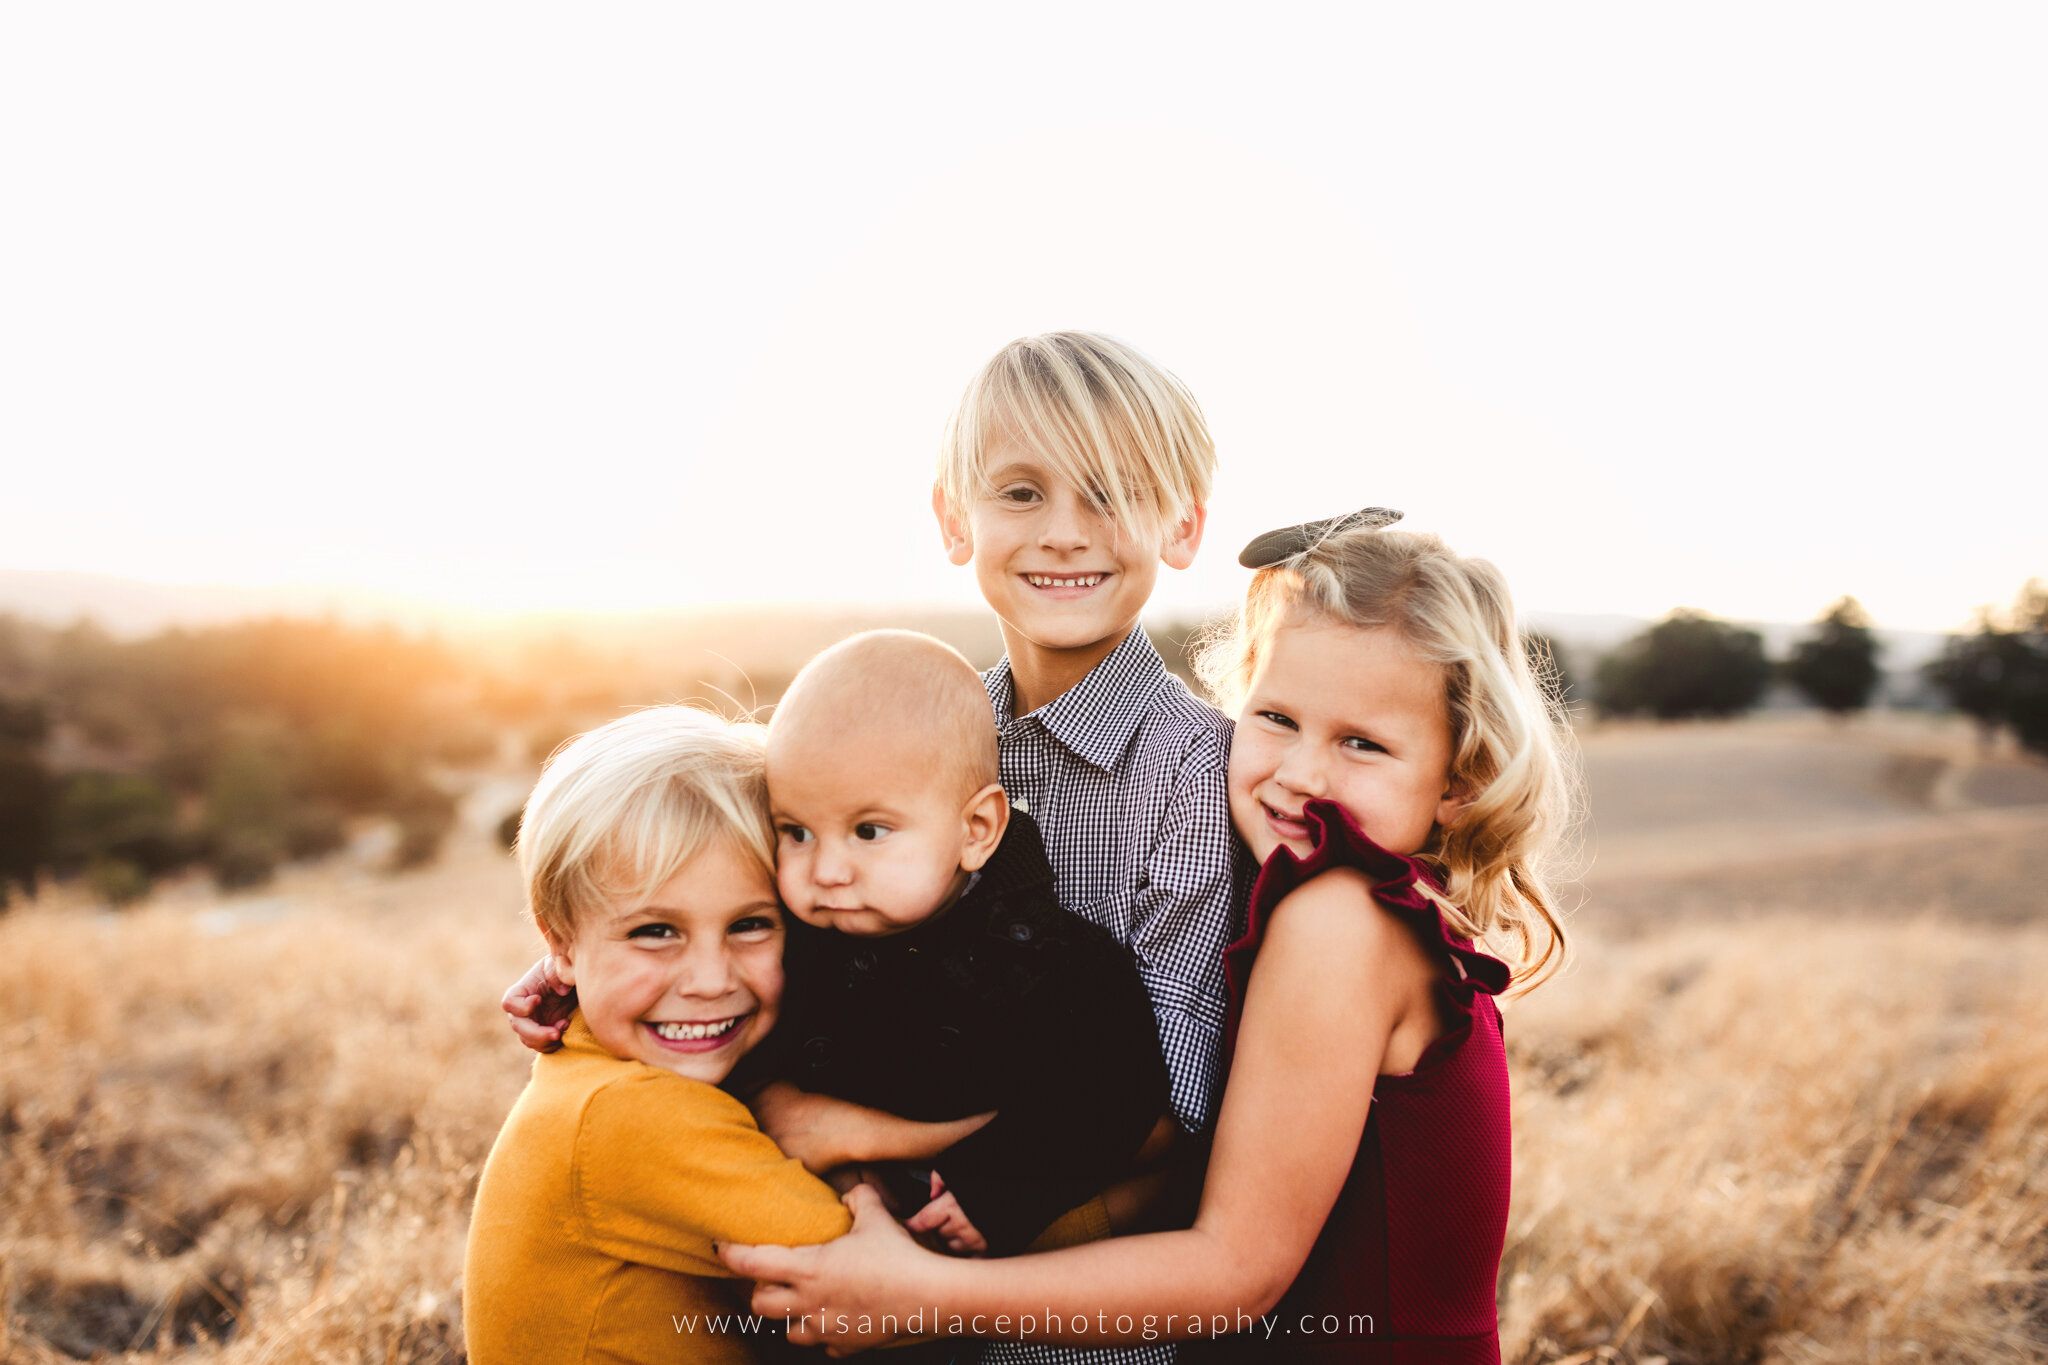 Outdoor California Family Photos at Sunset  |  Iris and Lace Photography